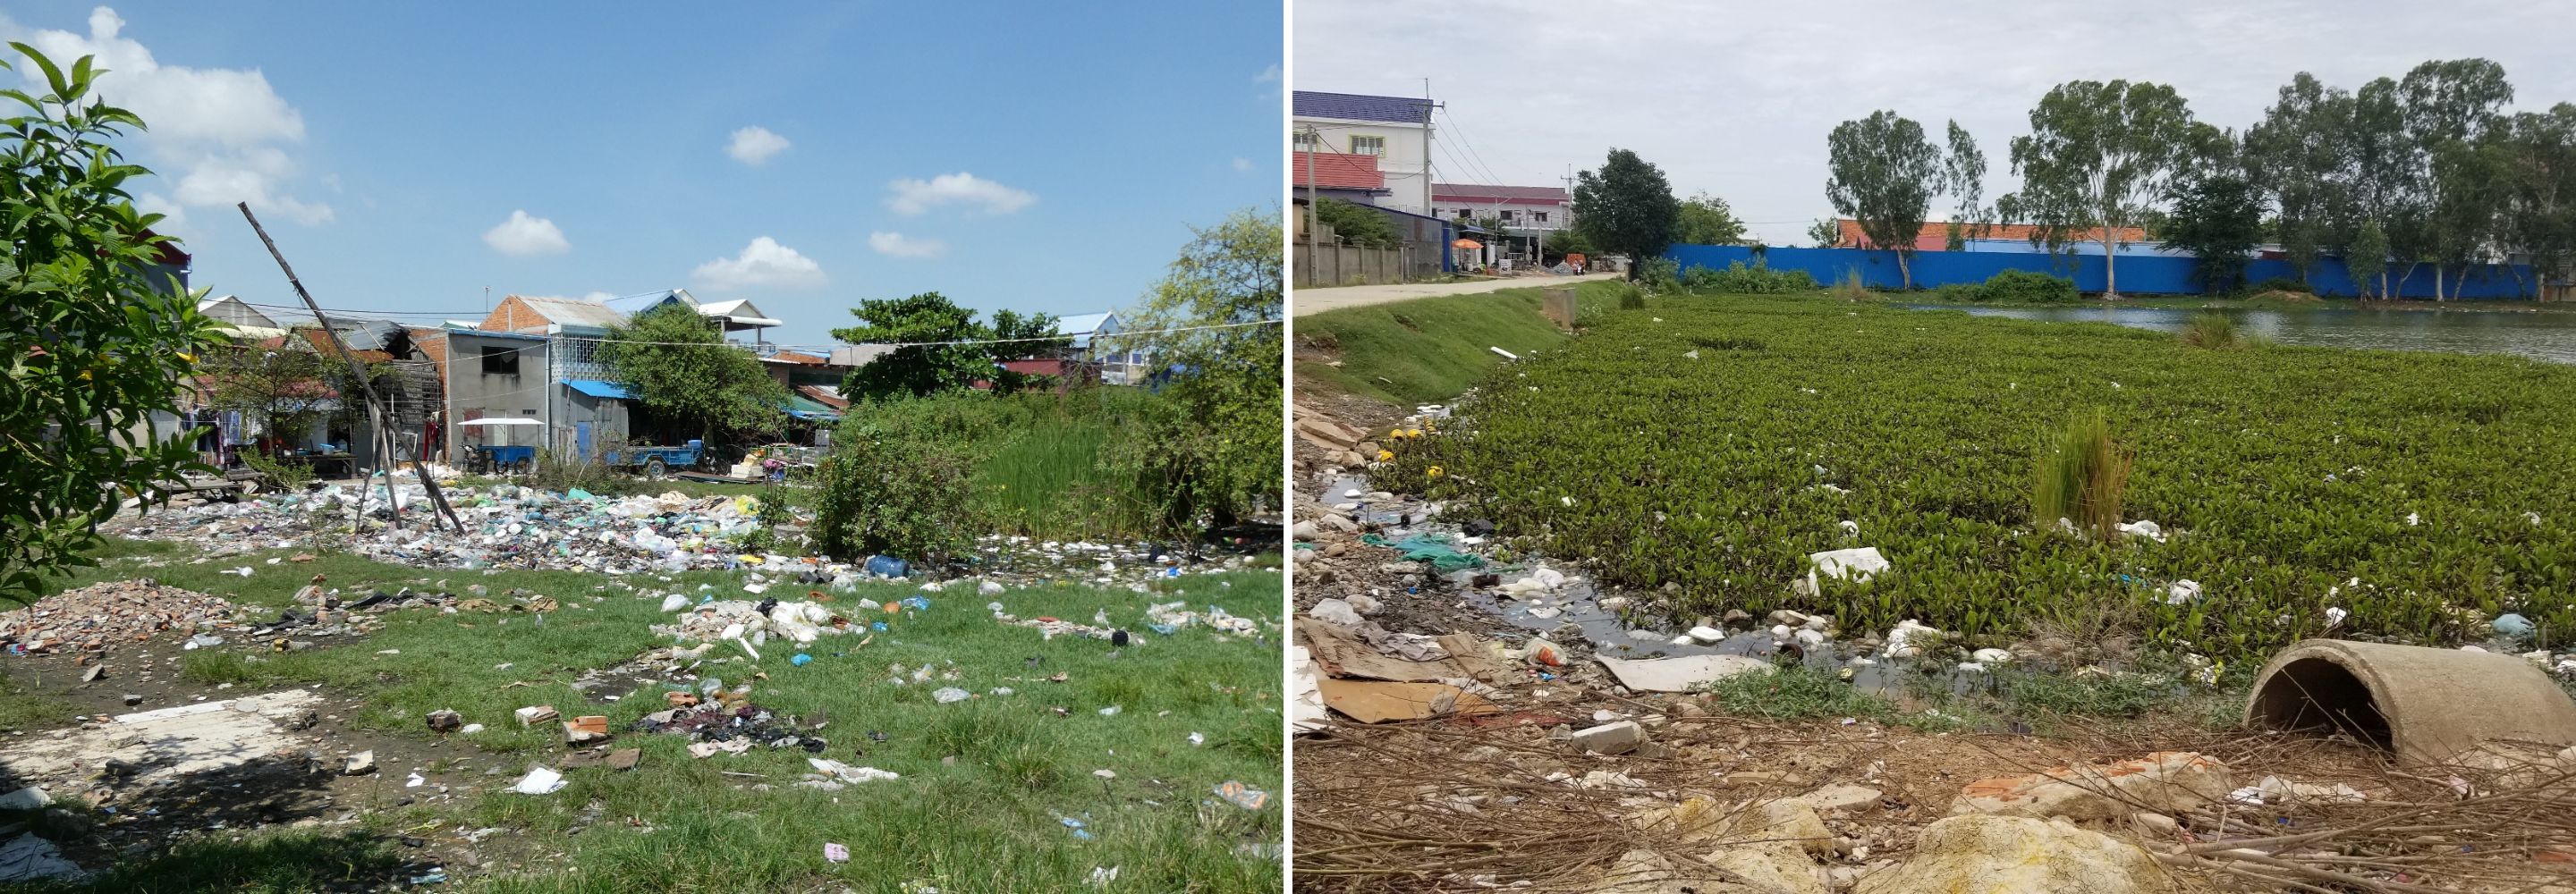 waste and lake in the suburbs of Phnom Penh